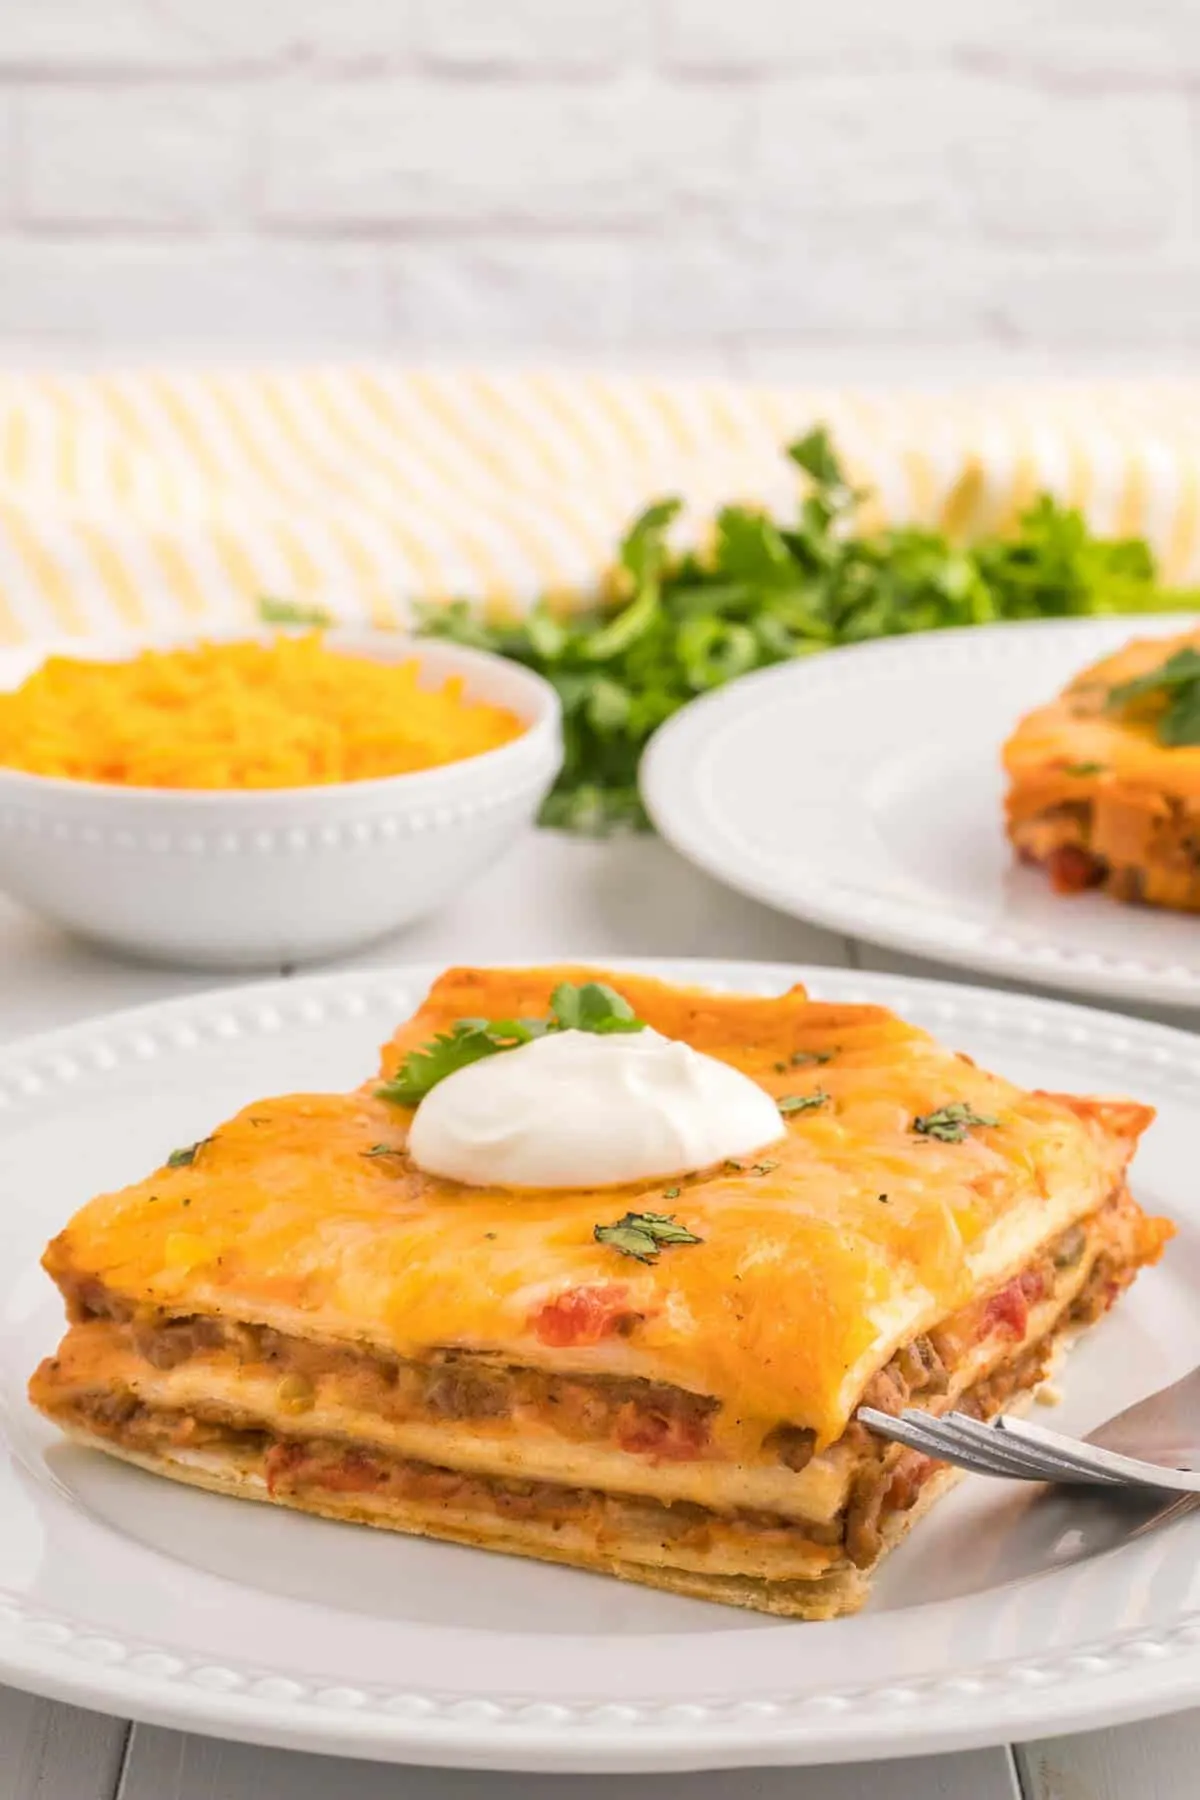 Creamy Burrito Casserole is a hearty dish loaded with flour tortillas, ground beef, refried beans, diced tomatoes, shredded cheese, salsa and sour cream.